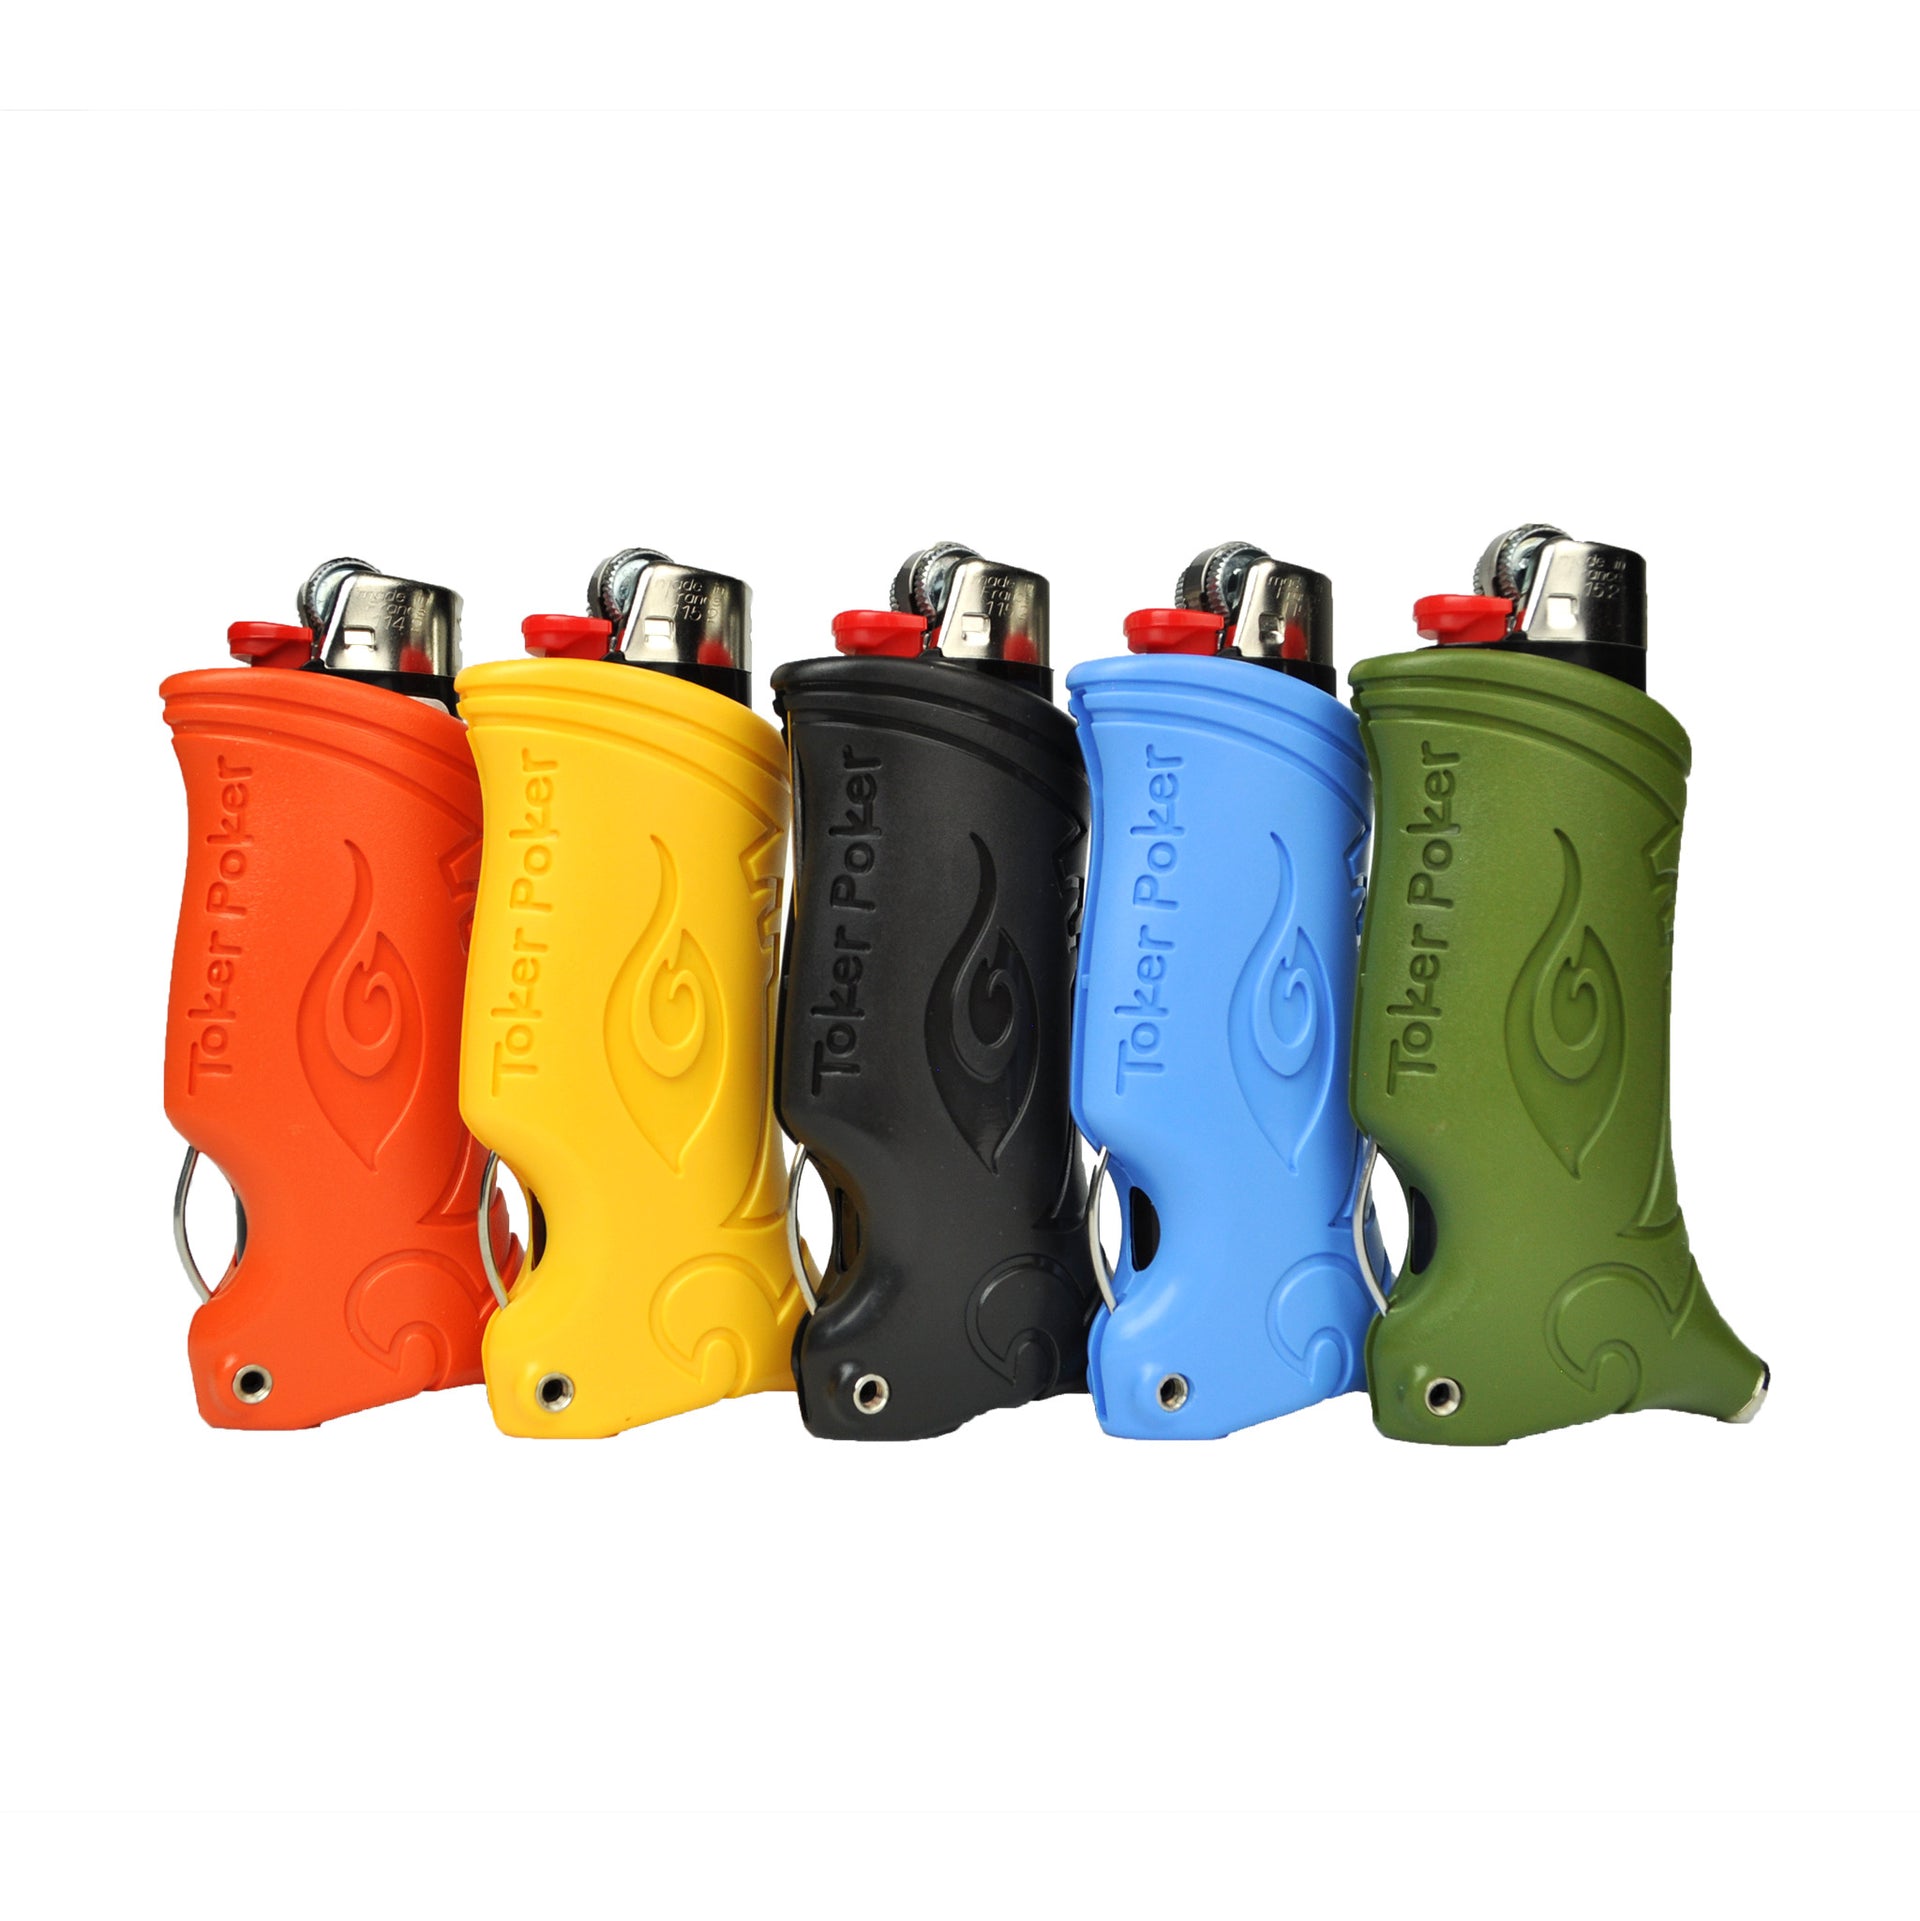  Toker Poker - Bic Lighter Case Multi Tool 2.0 - Carolina, All  Inclusive Tool for Camping and Other : Sports & Outdoors